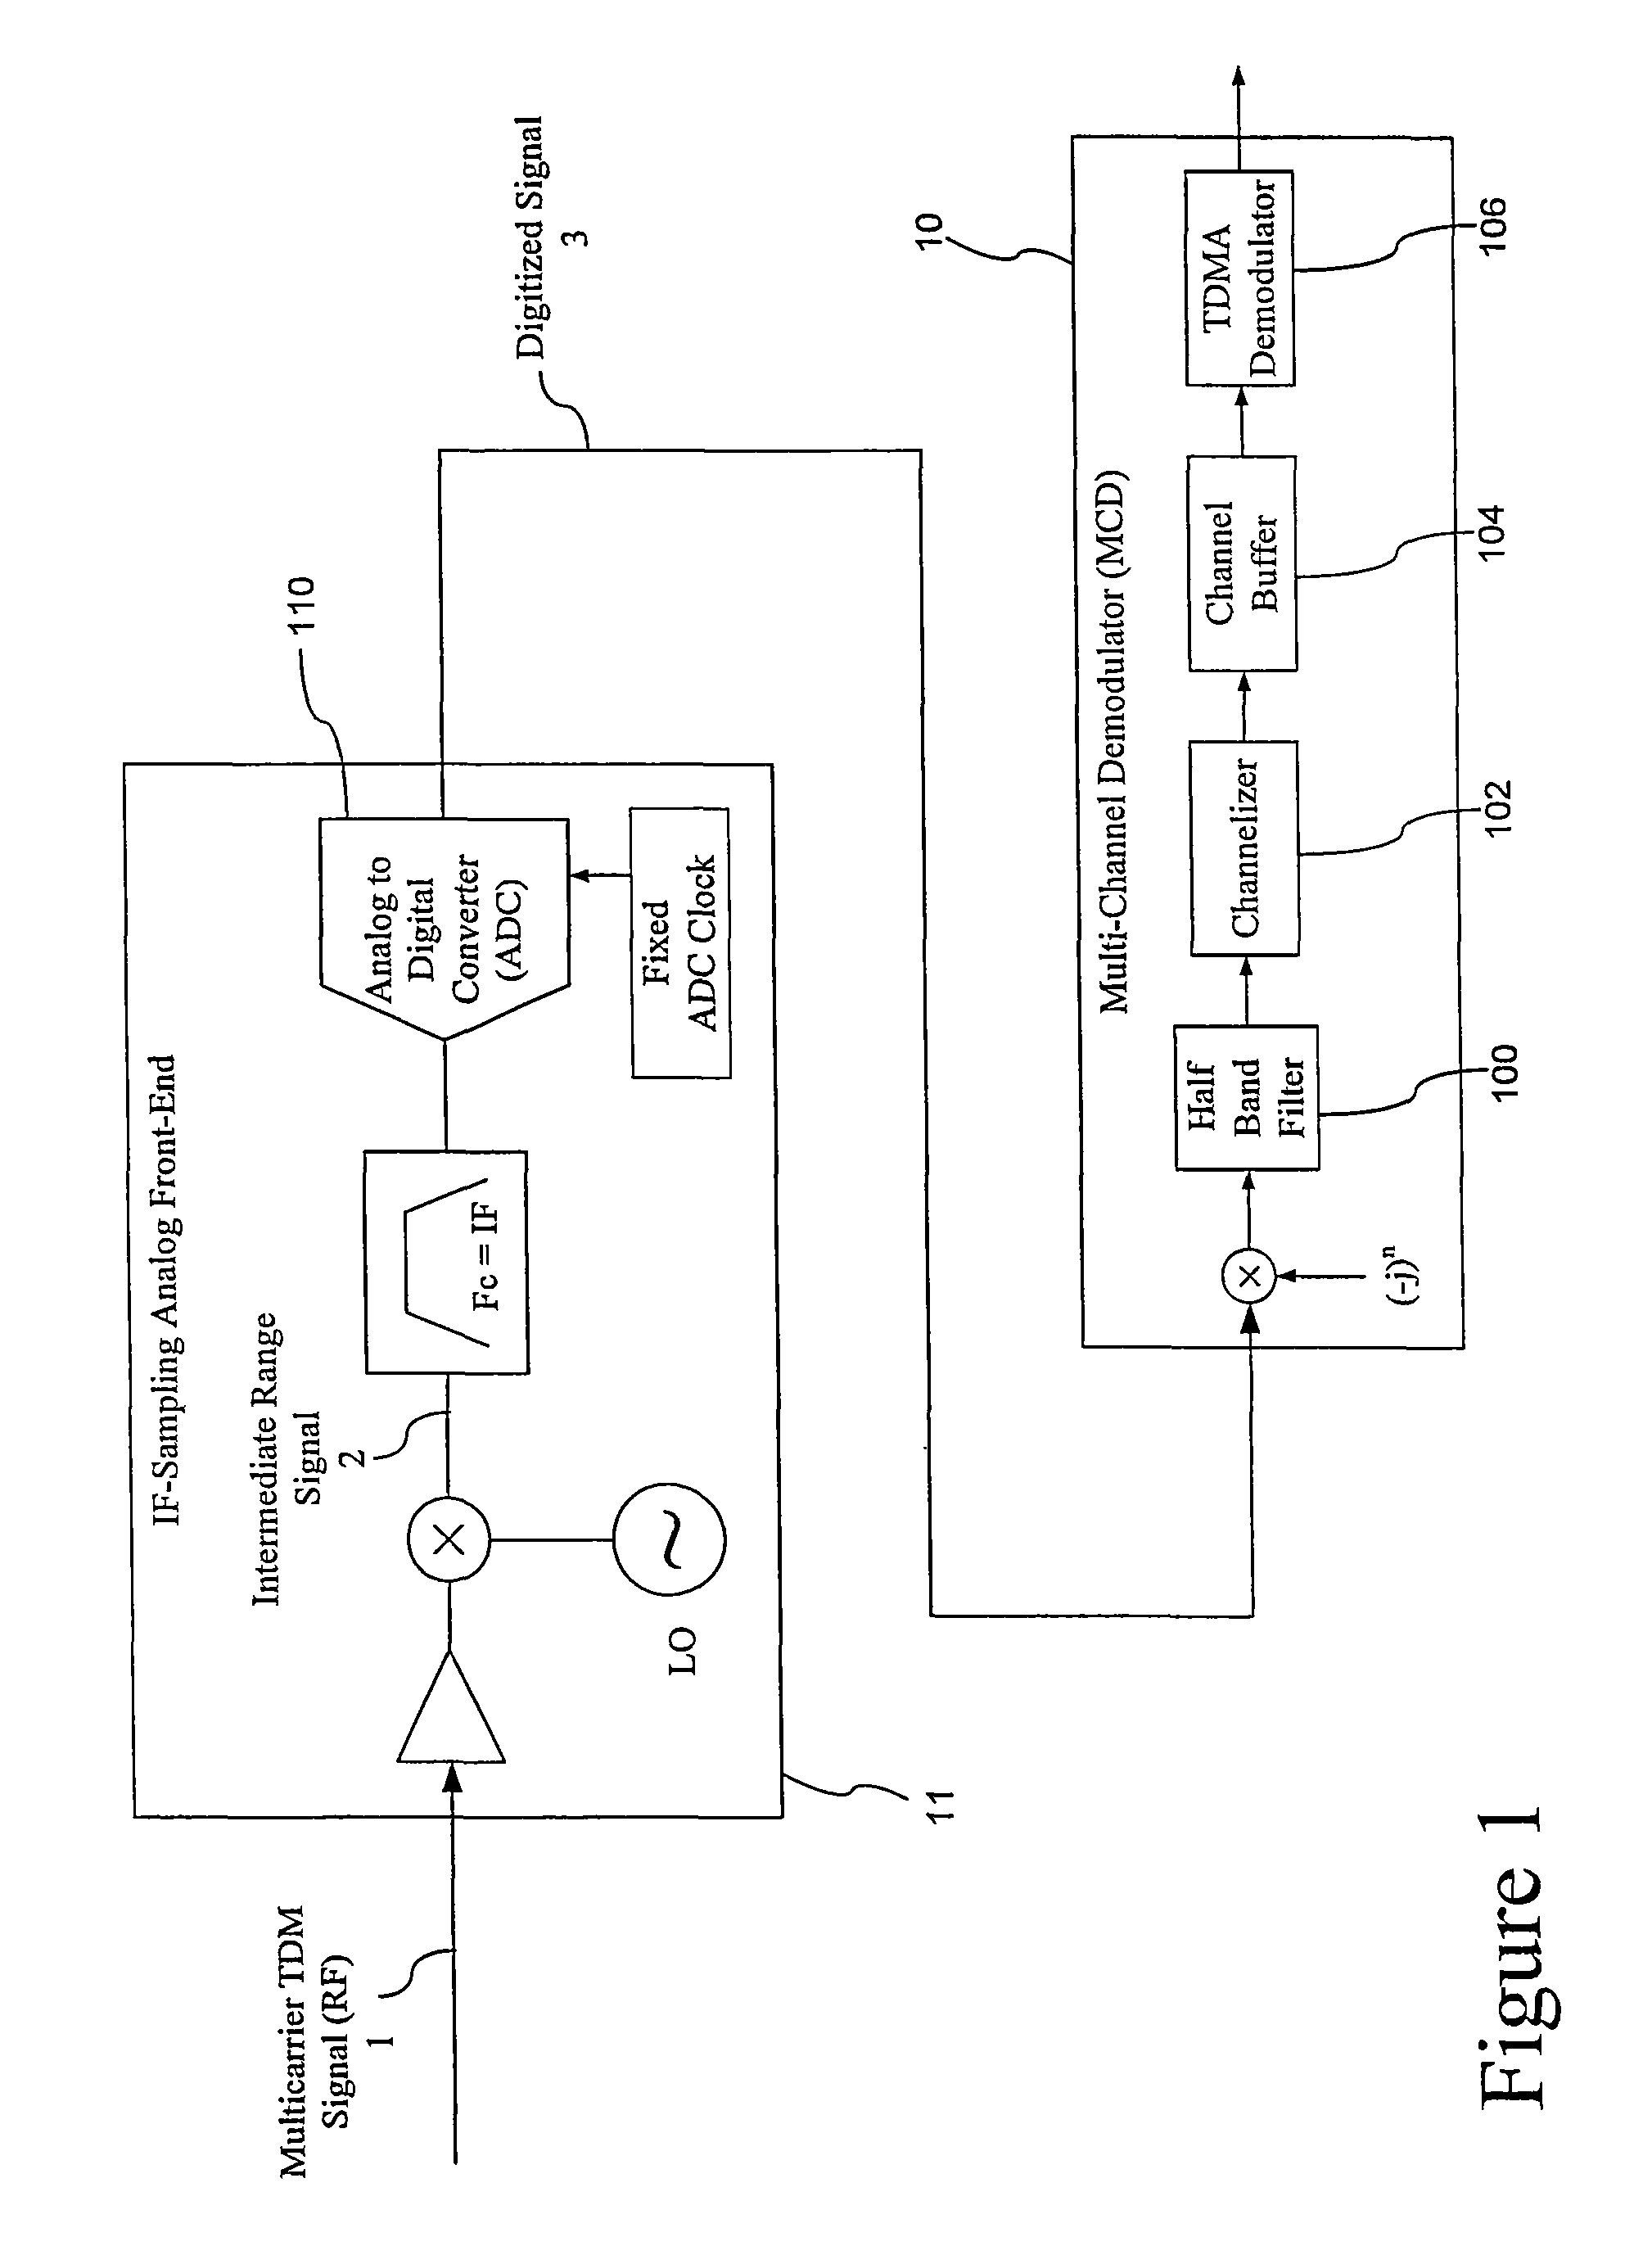 Multicarrier channelization and demodulation apparatus and method